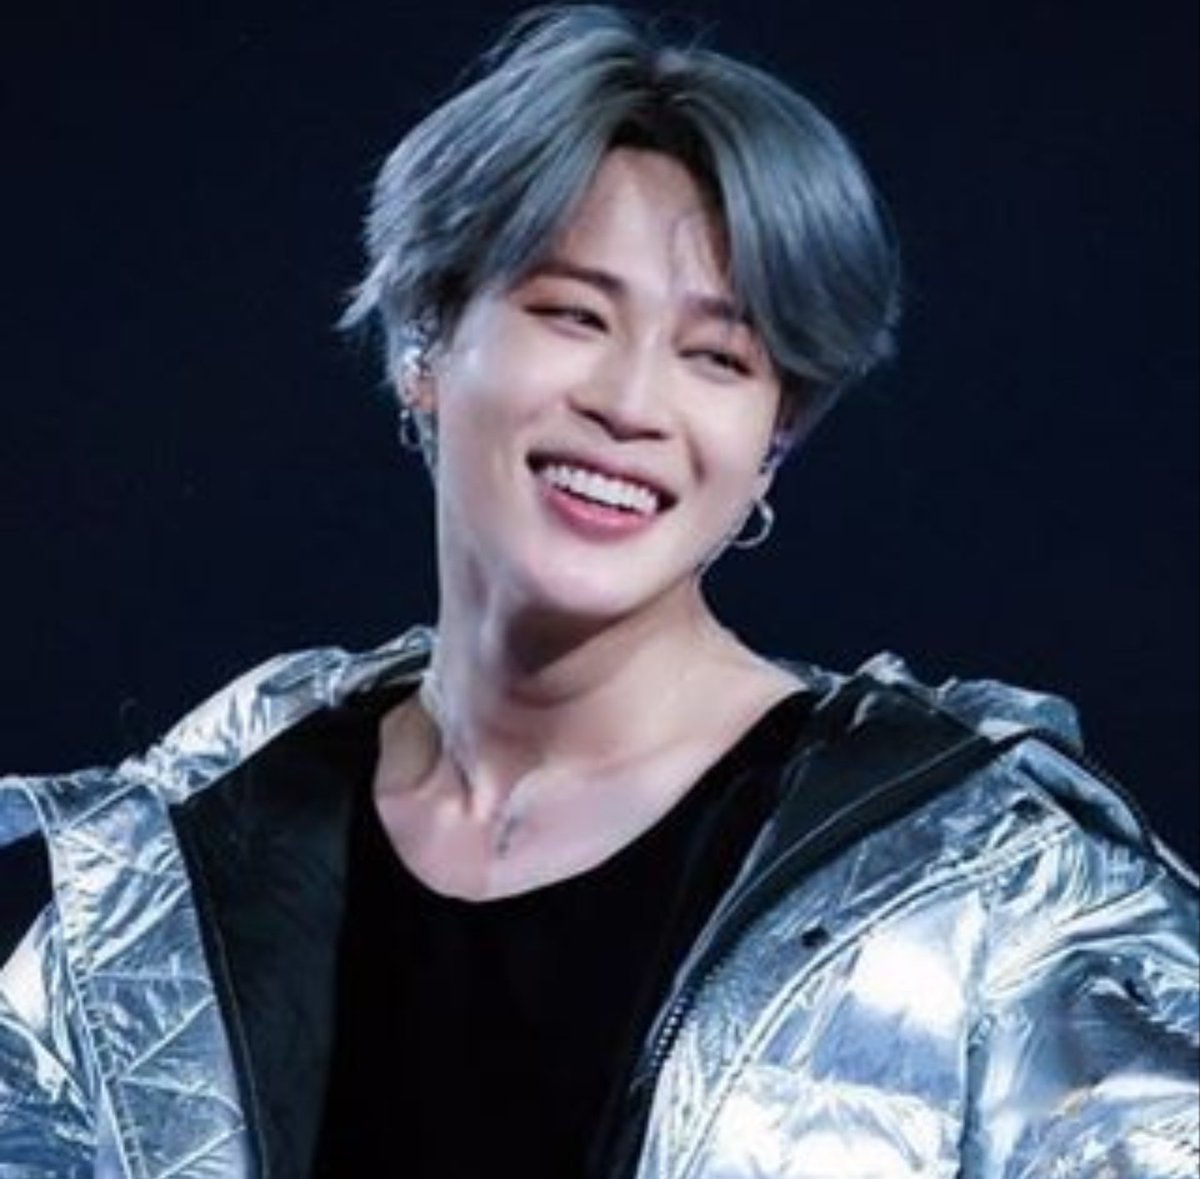 Jimin reaching the epitome of happiness - a thread that'll break your uwu machines. 